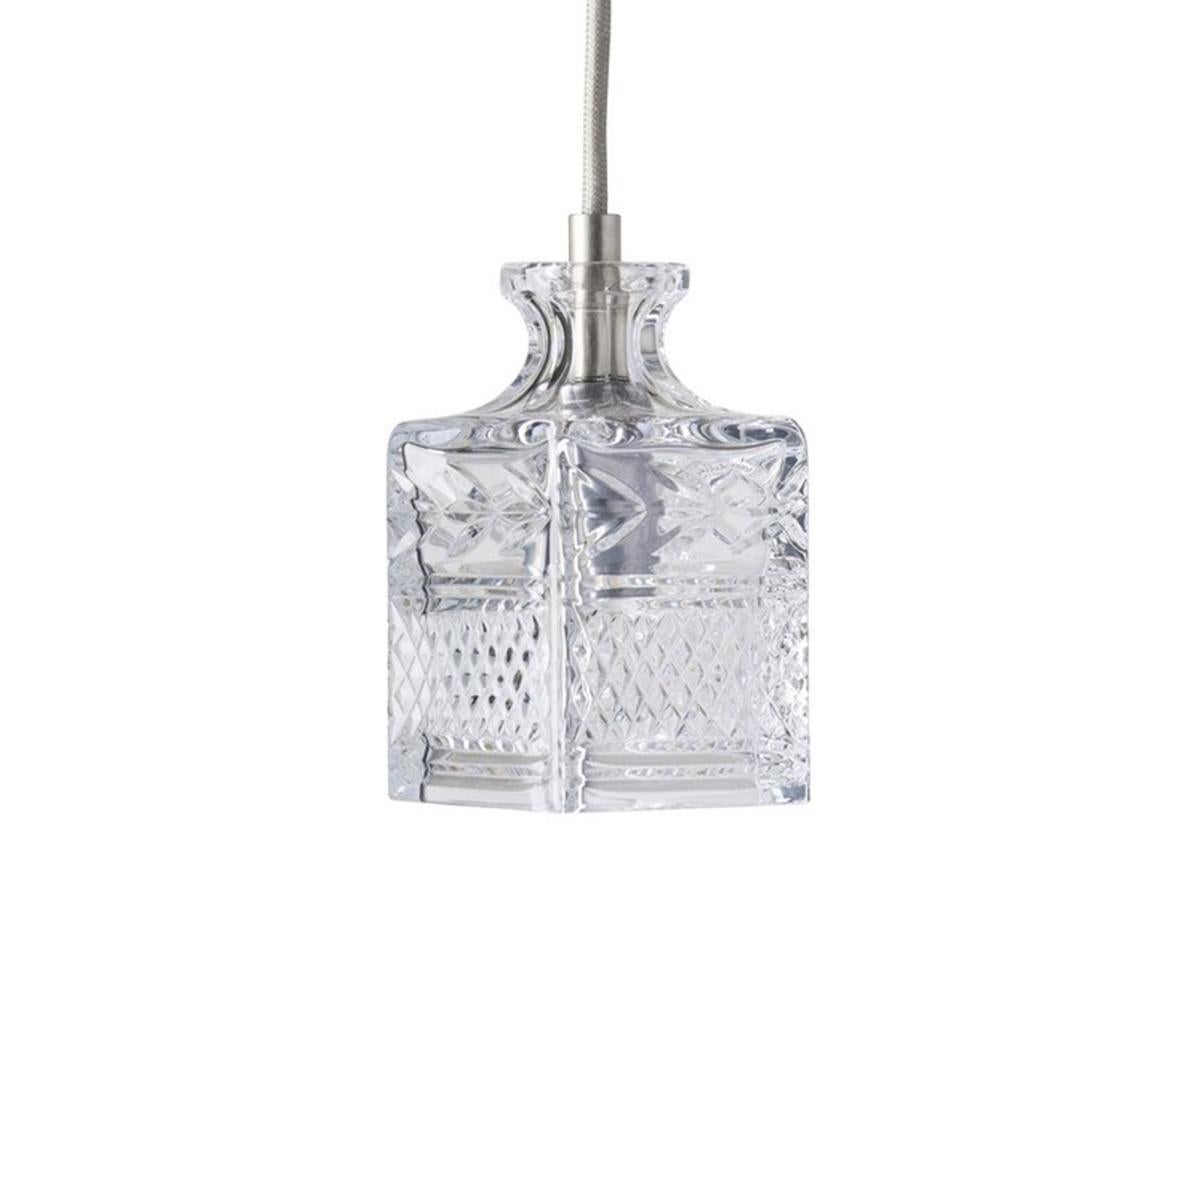 Silver linen cord accented mouth blown etched crystal canopy suspension lamps, composed in group set of 5.

     